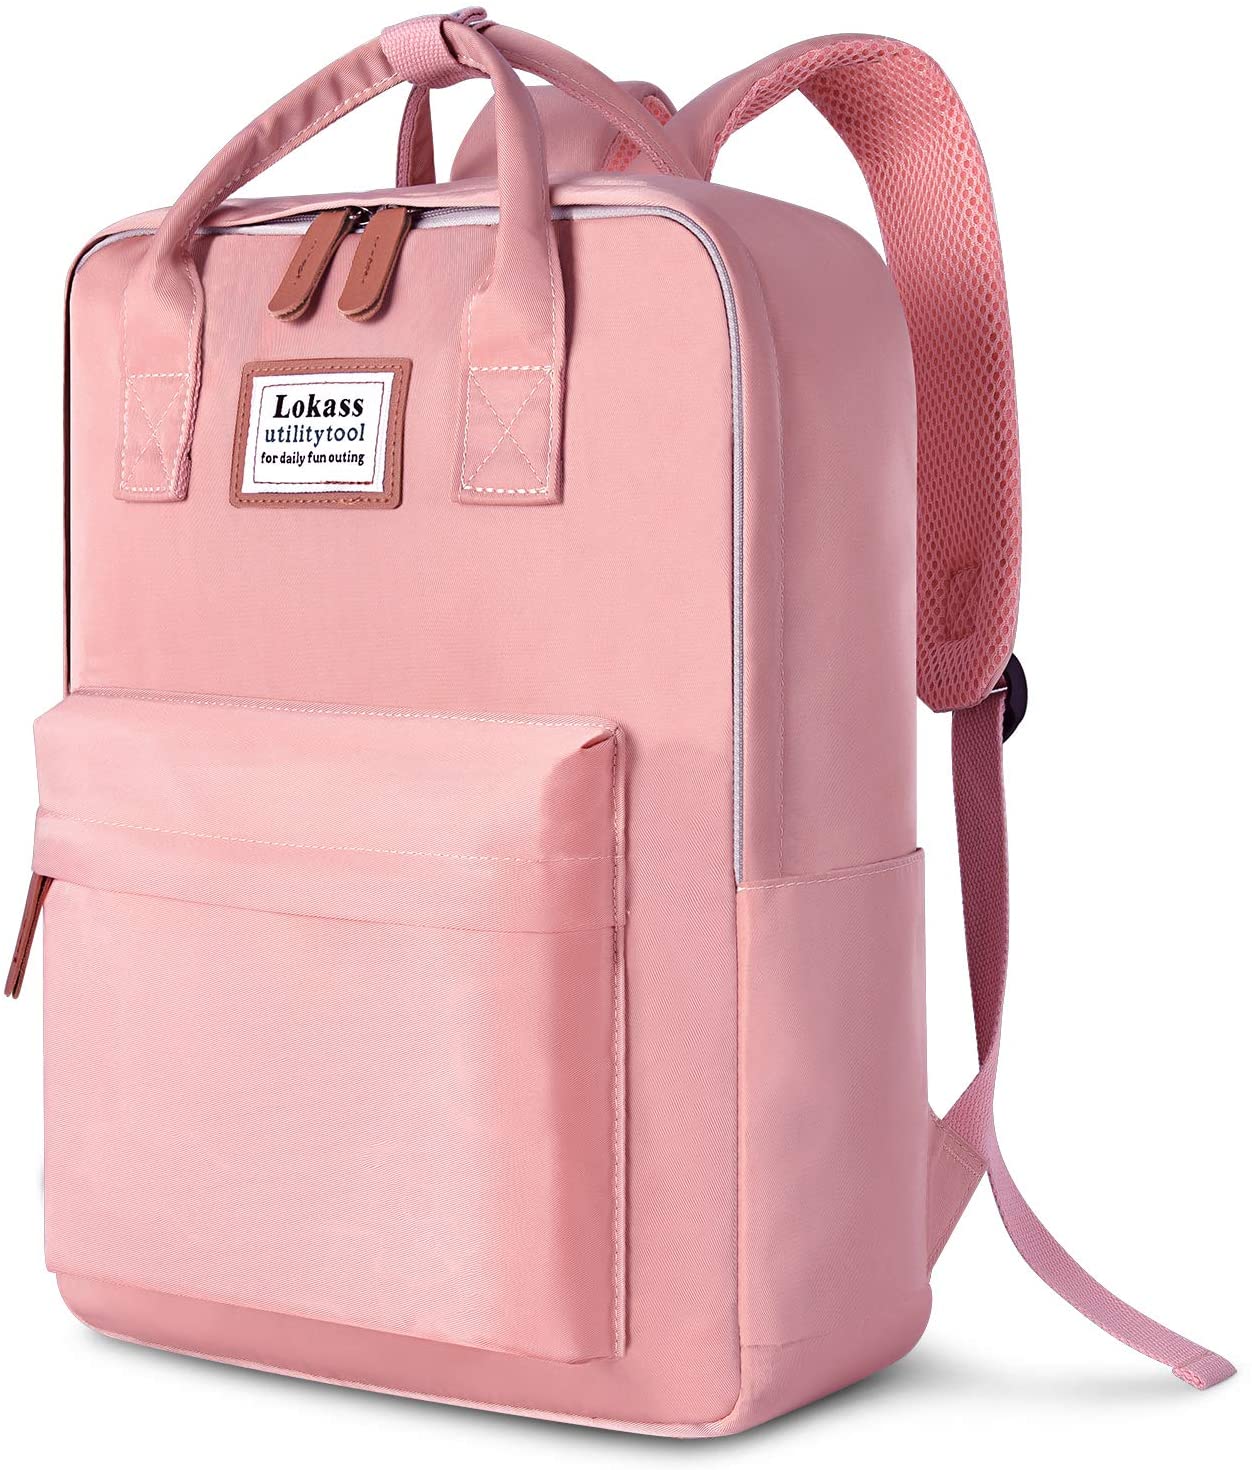 Stylish Carry All Bags For Girls